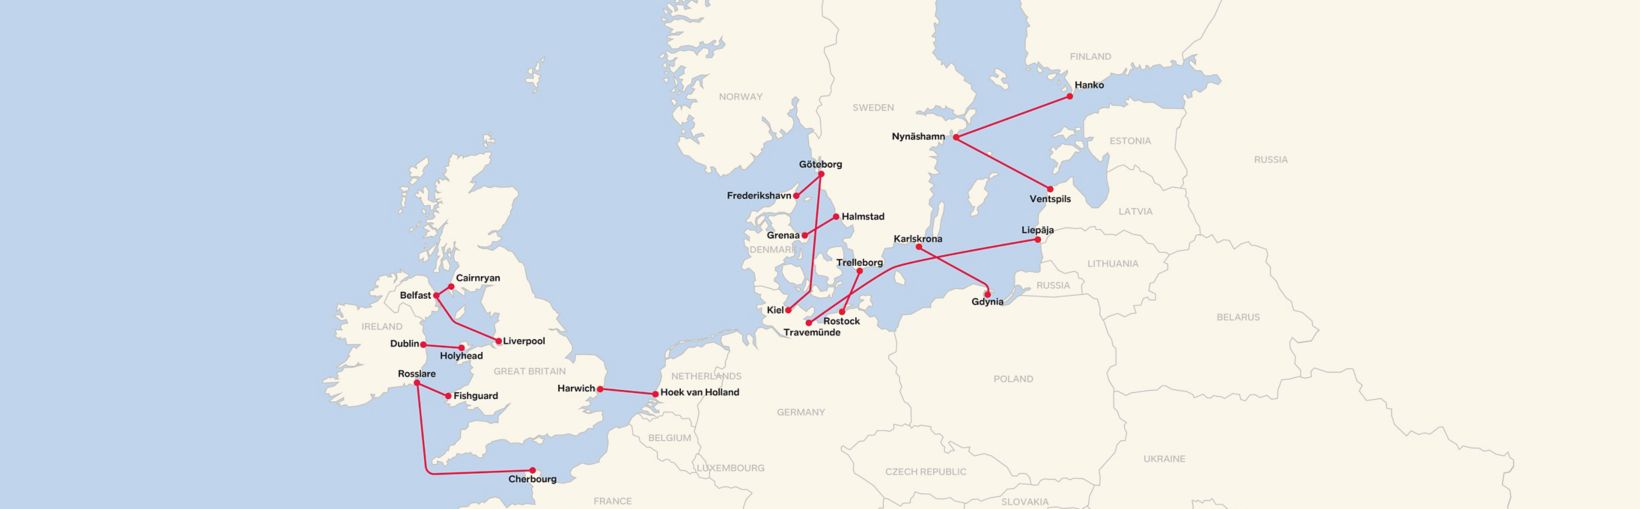 Route network map for all Stena Line travel routes.